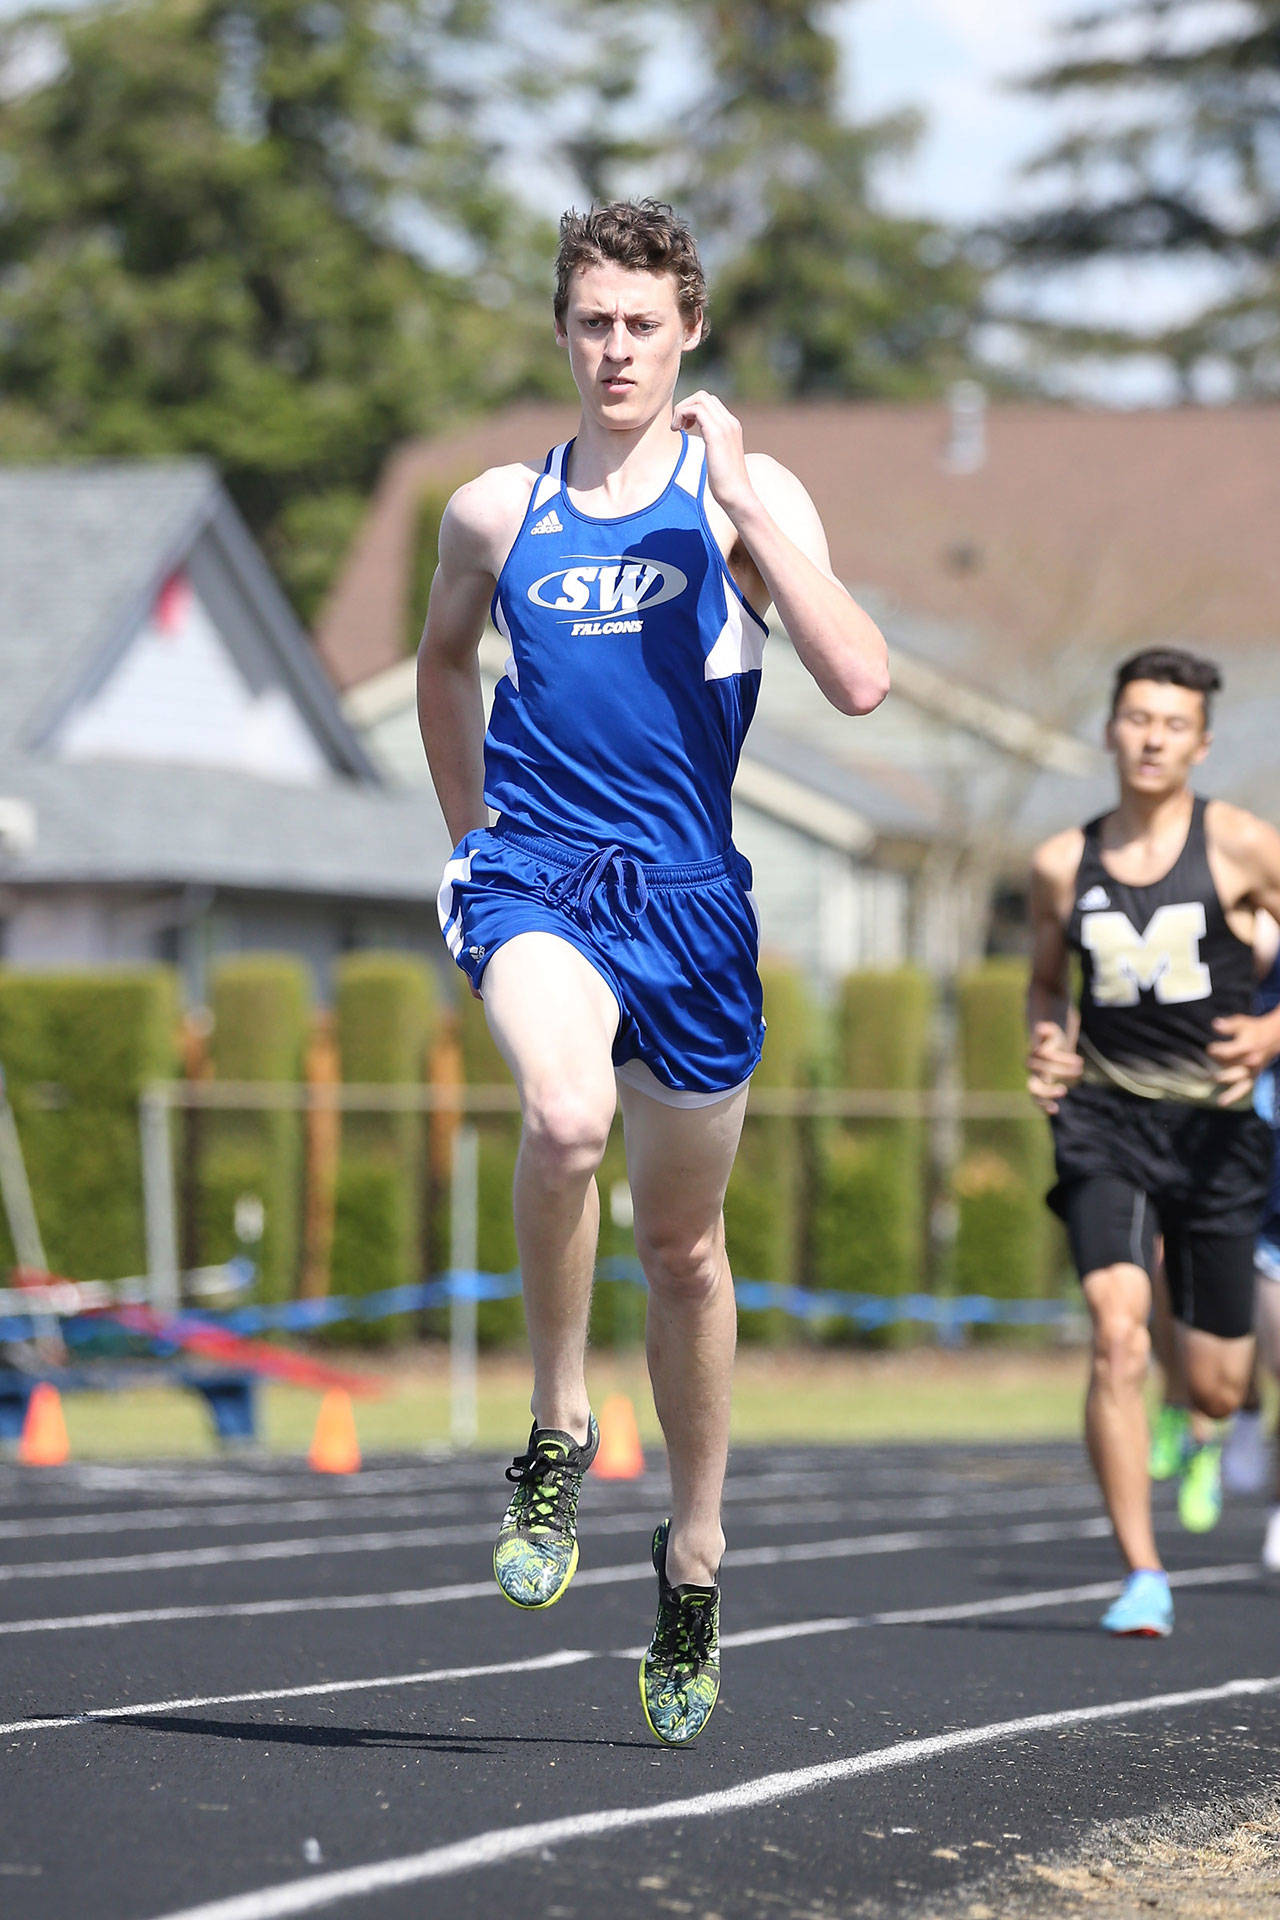 Callahan Yale runs to first place in the 800.(Photo by John Fisken)